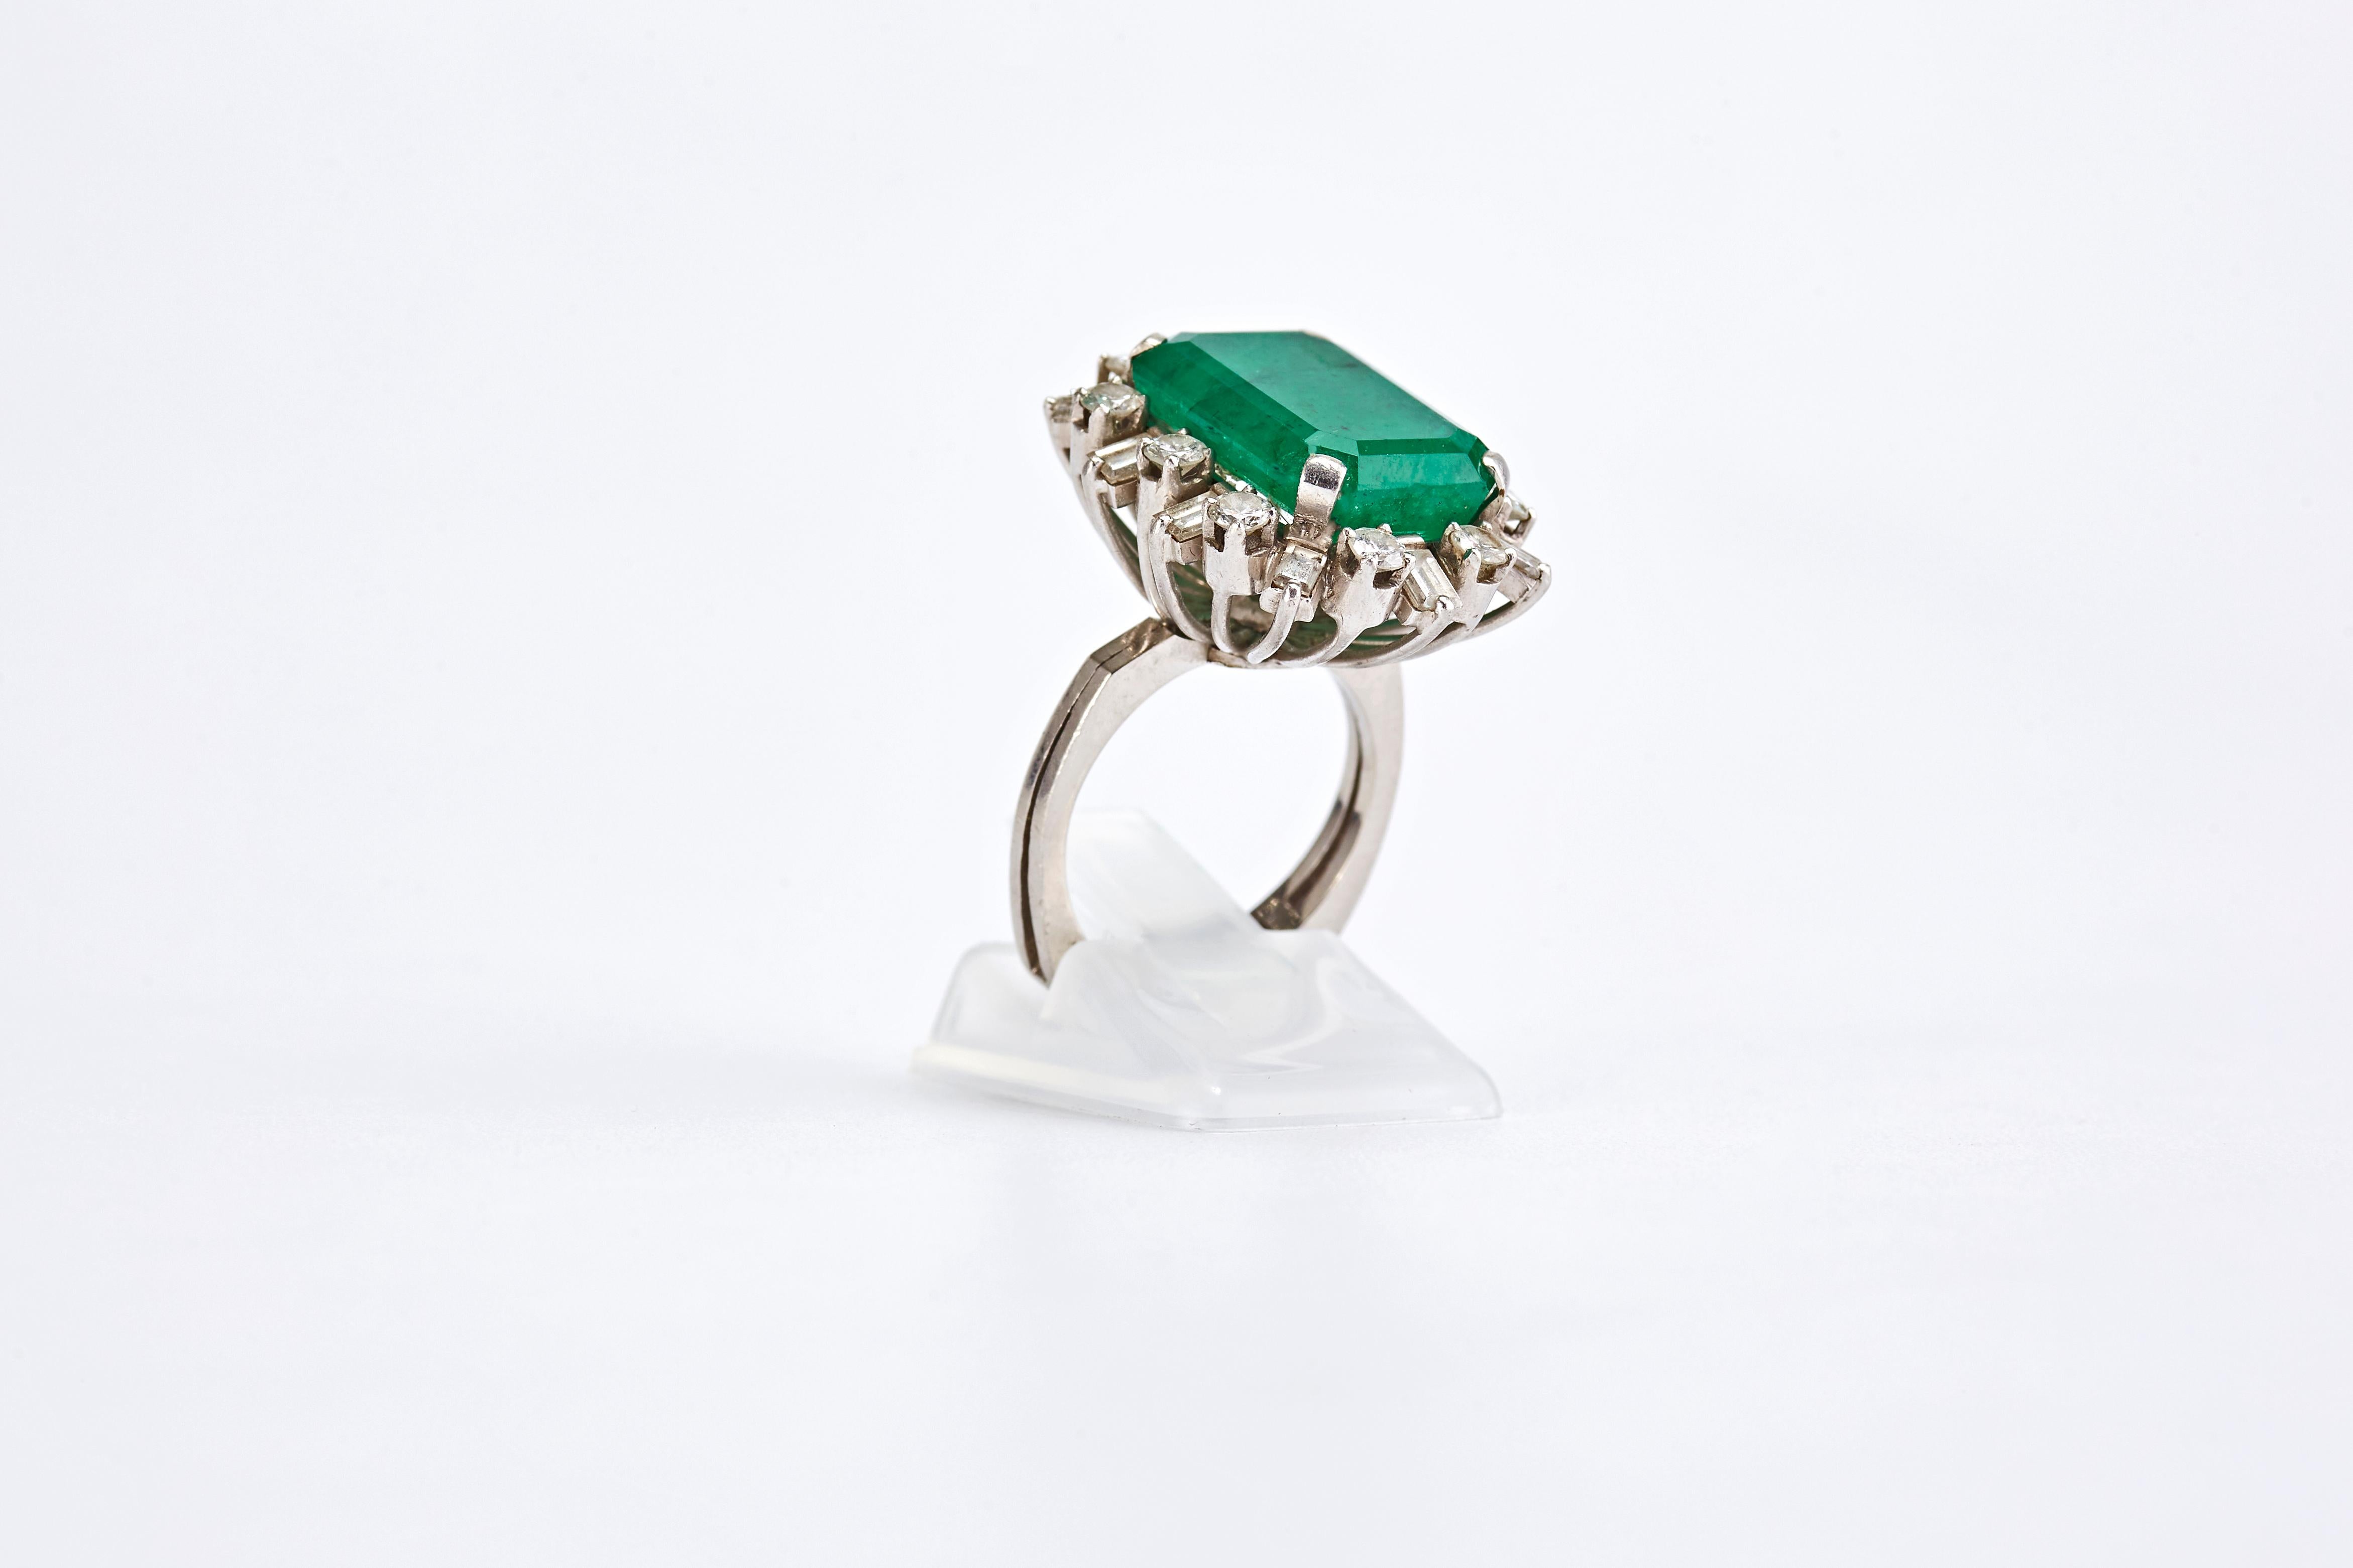 Emerald Cut 18 Karat White Gold Ring with 8.90 Carat Emerald Stone and Diamonds For Sale